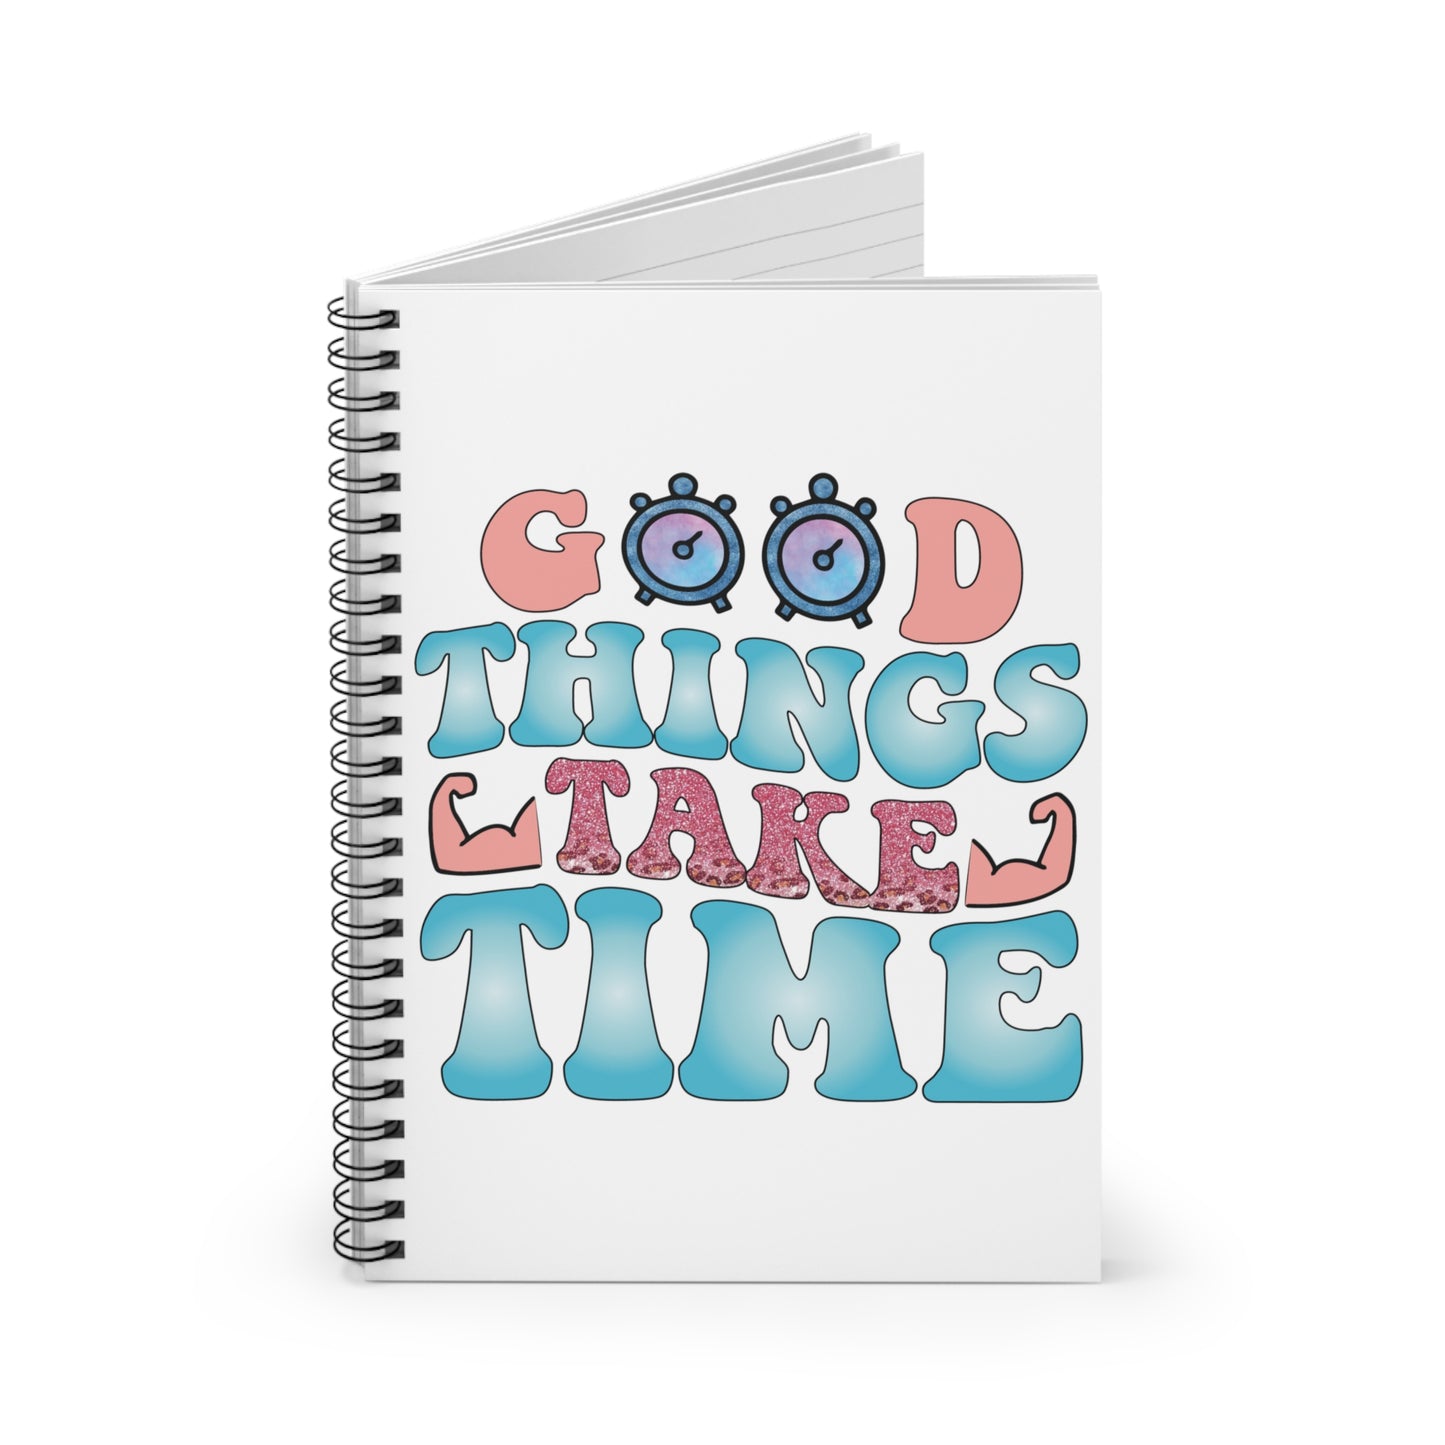 Good Things Take Time: Spiral Notebook - Log Books - Journals - Diaries - and More Custom Printed by TheGlassyLass